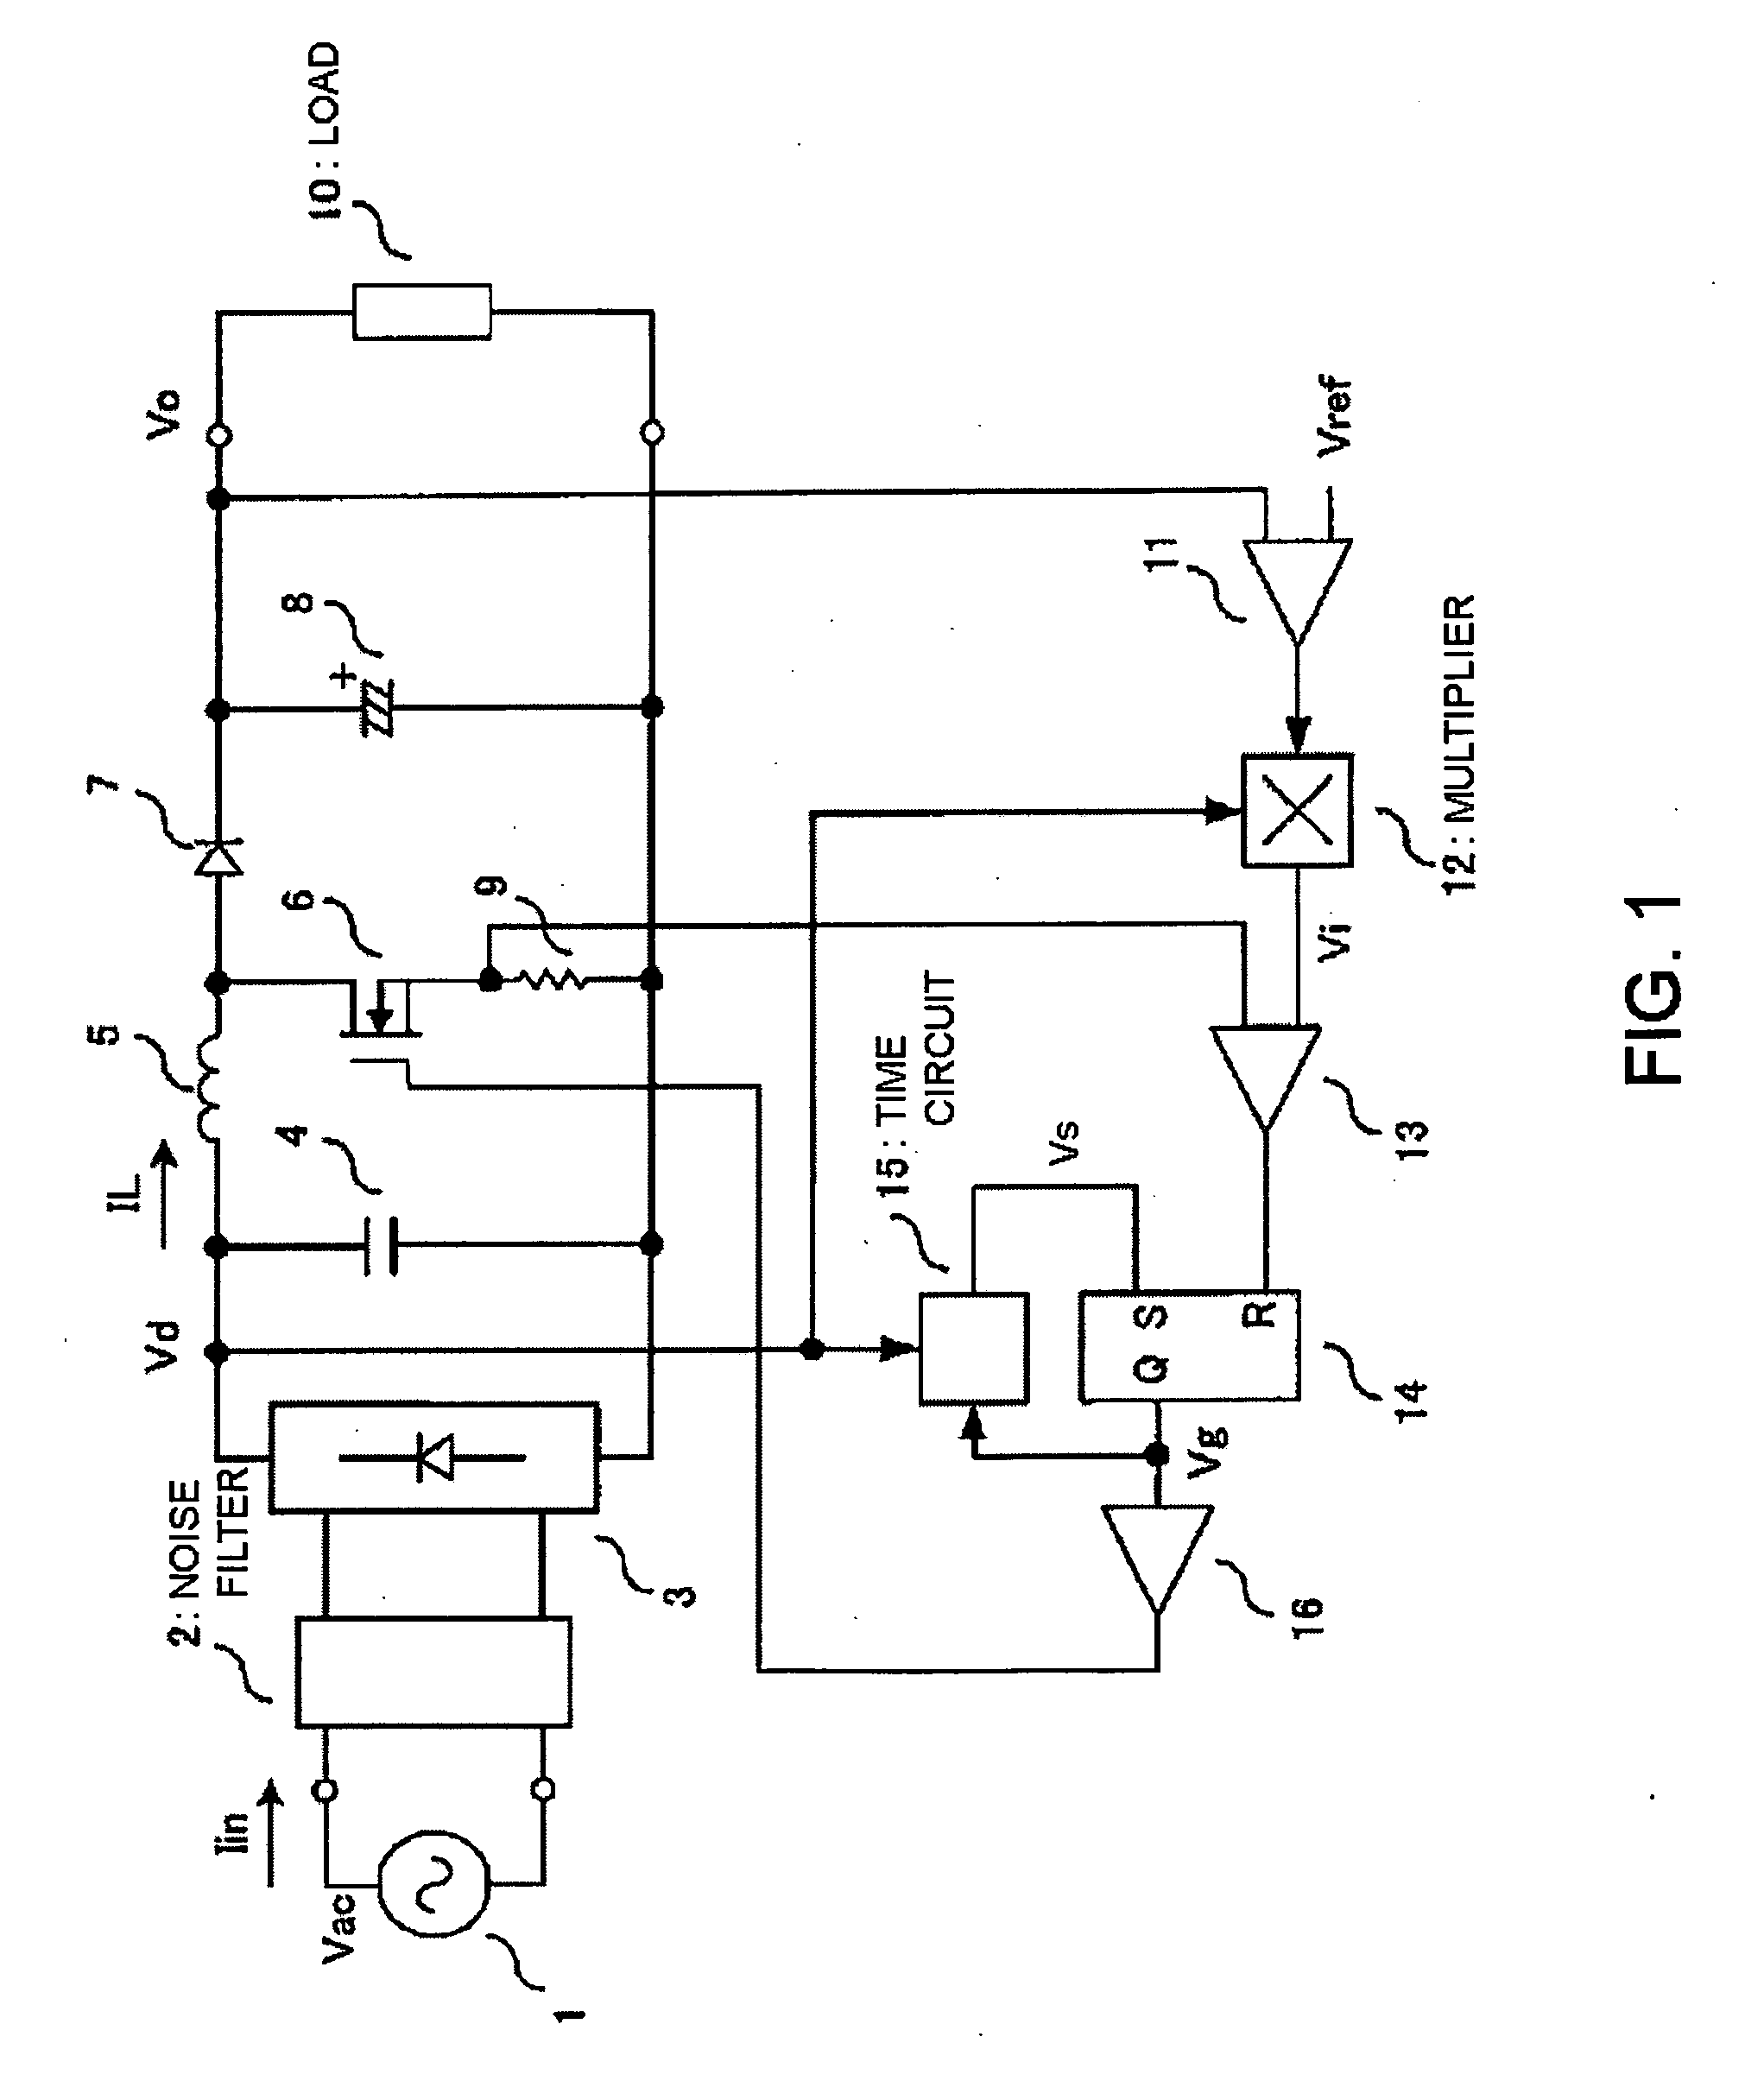 Control system of a power factor correction circuit